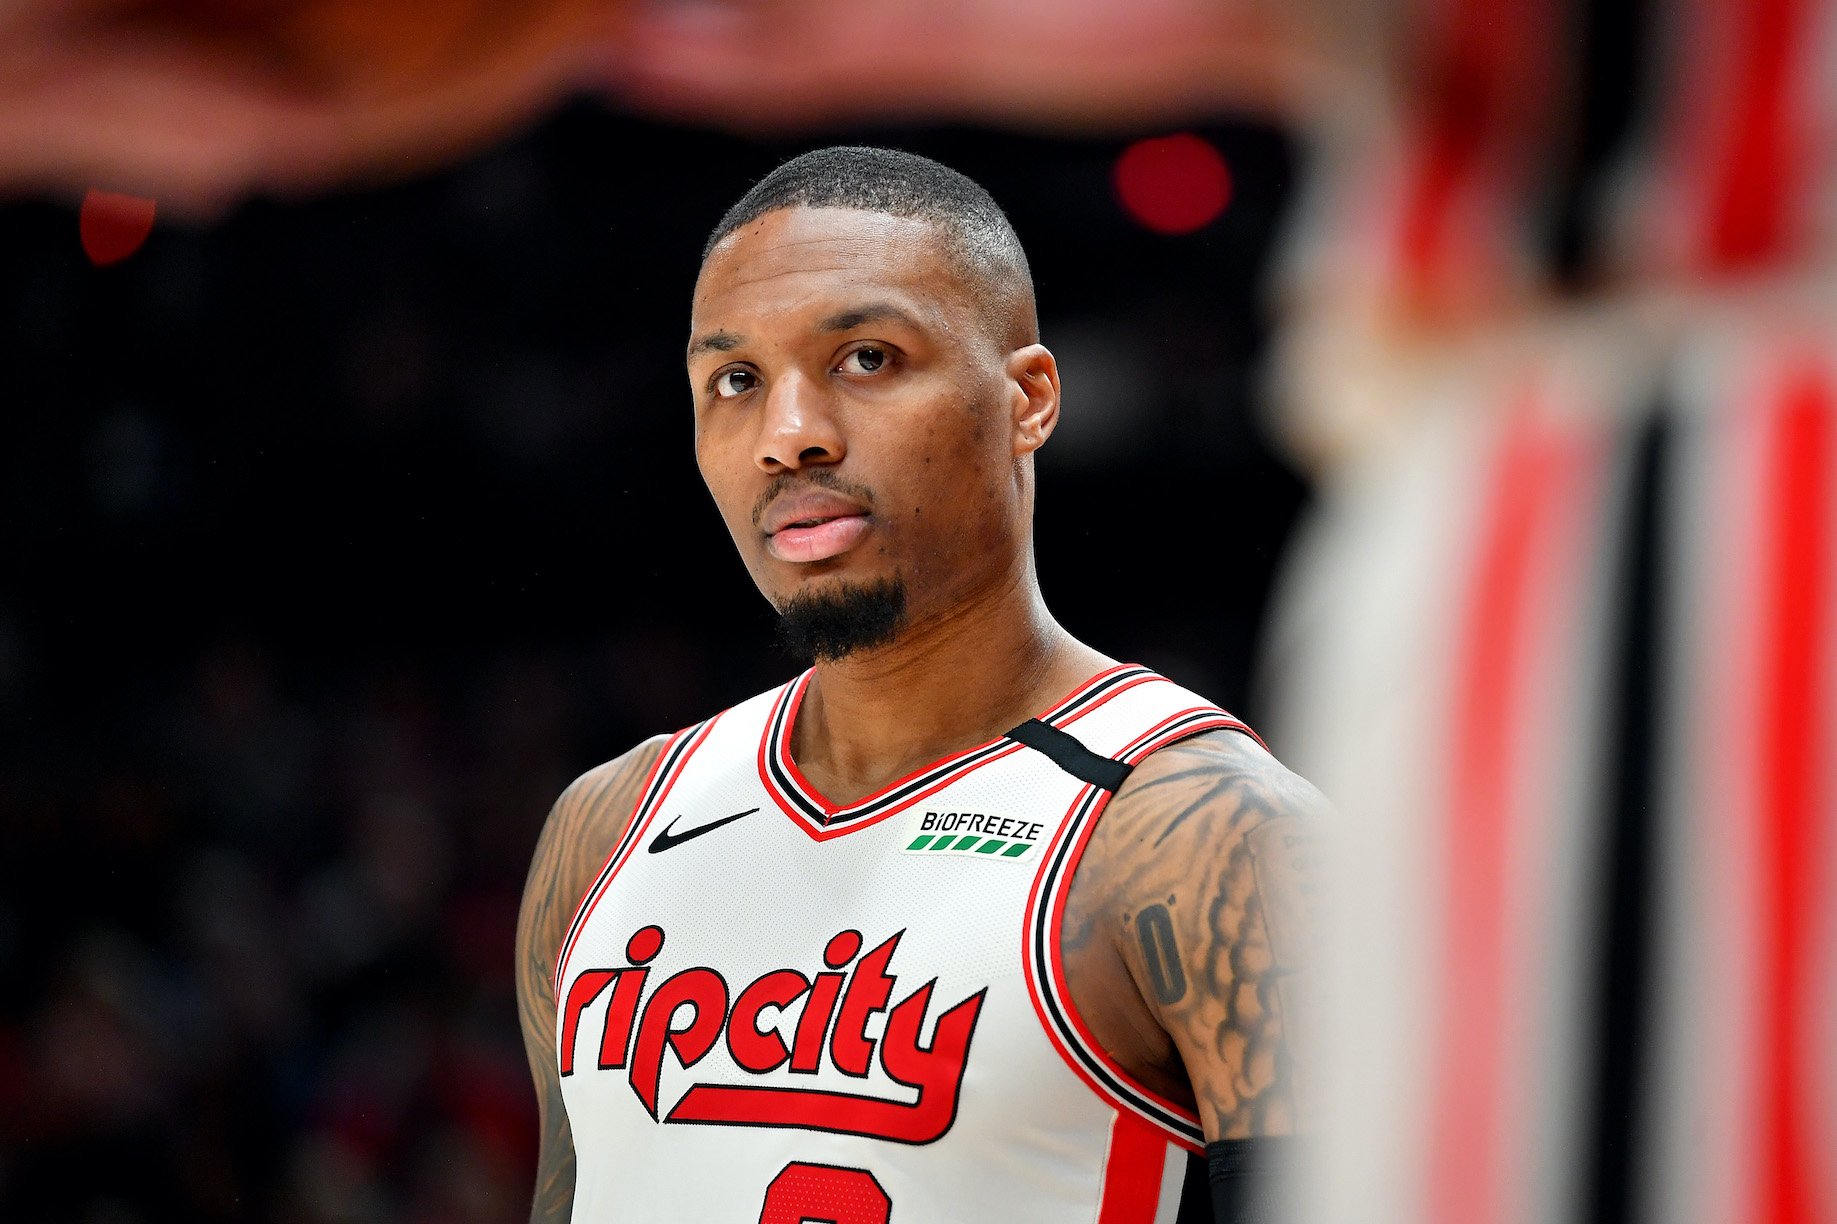 Damian Lillard #0 of the Portland Trail Blazers looks on during the second half of the game against the Washington Wizards at the Moda Center on March 04, 2020